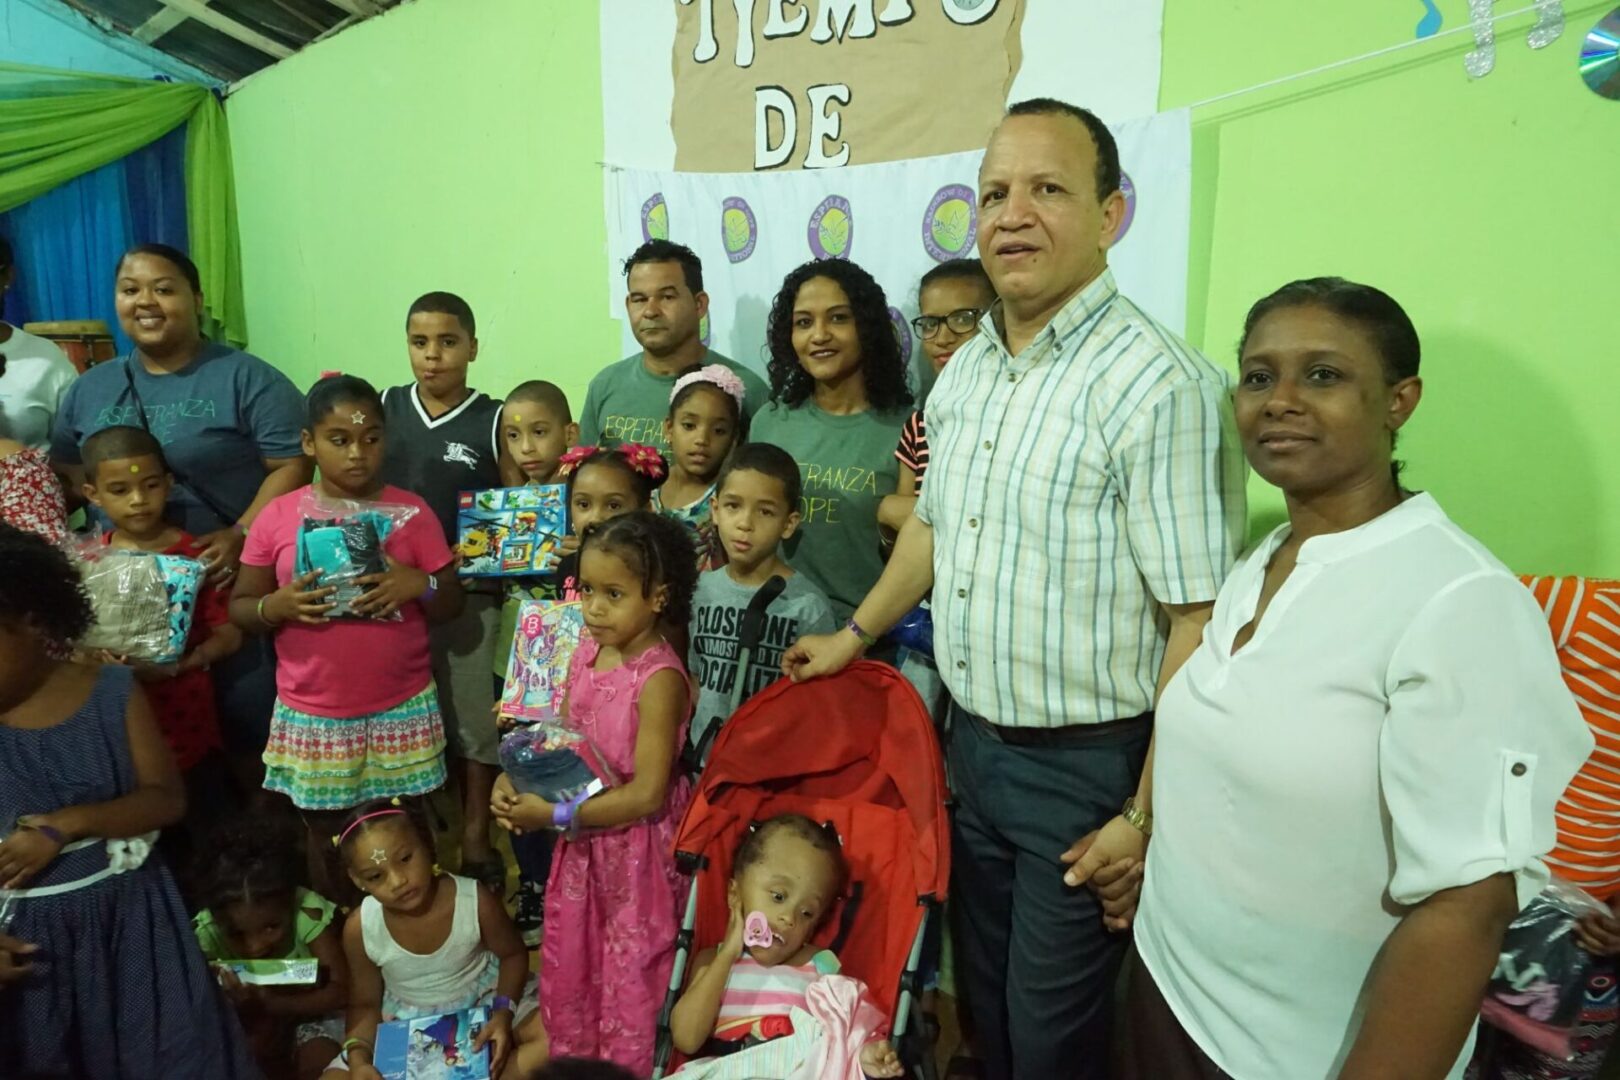 Our staff and adults from the Iglesia together with some of the children